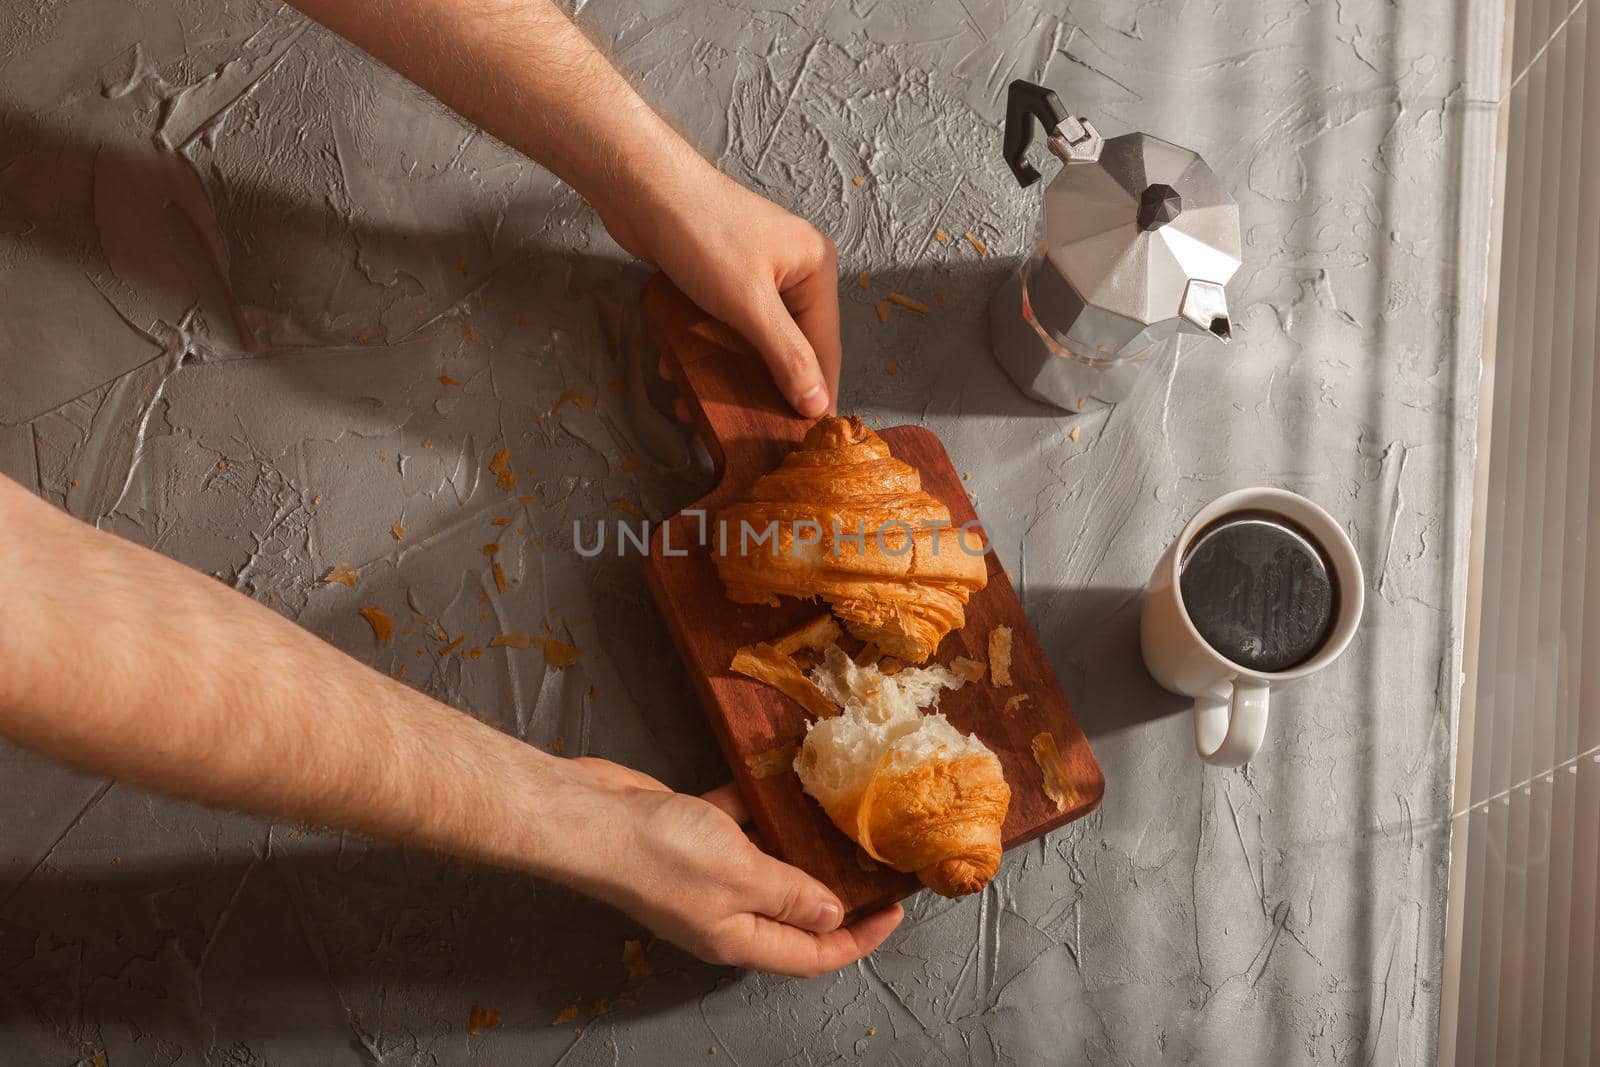 Breakfast with croissant on cutting board and black coffee. Morning meal and breakfast concept. by Satura86